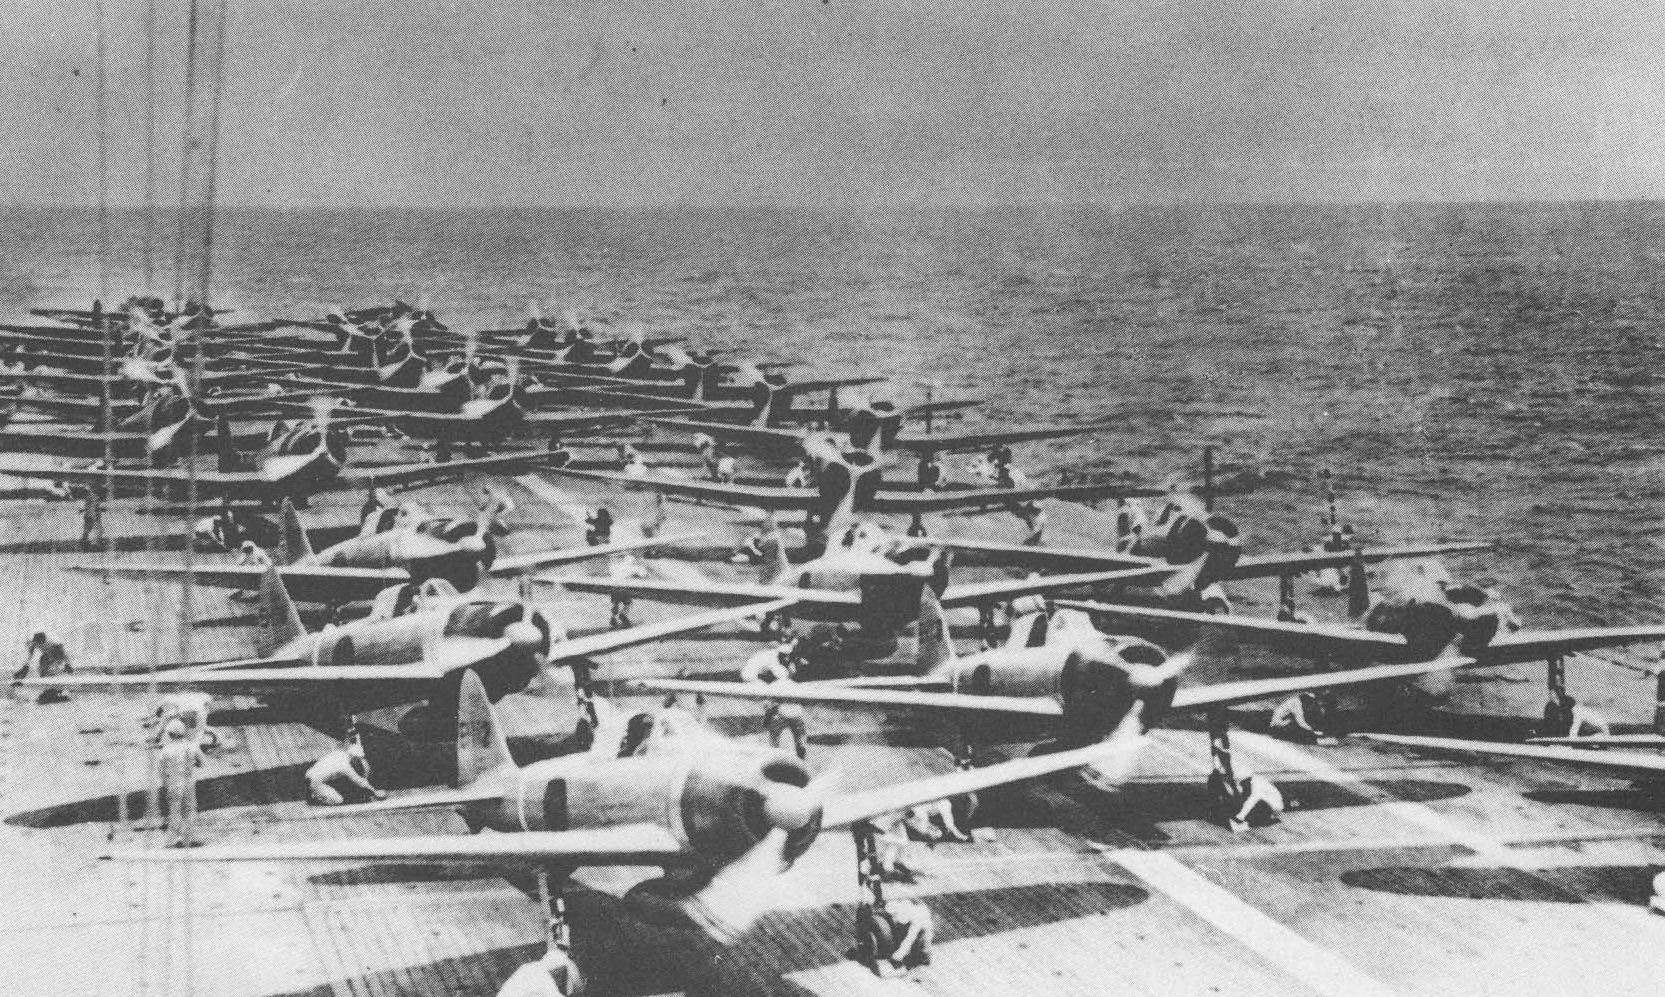 Aircraft prepared to launch from Shokaku to attack Pearl Harbor, US Territory of Hawaii, 7 Dec 1941, photo 2 of 3